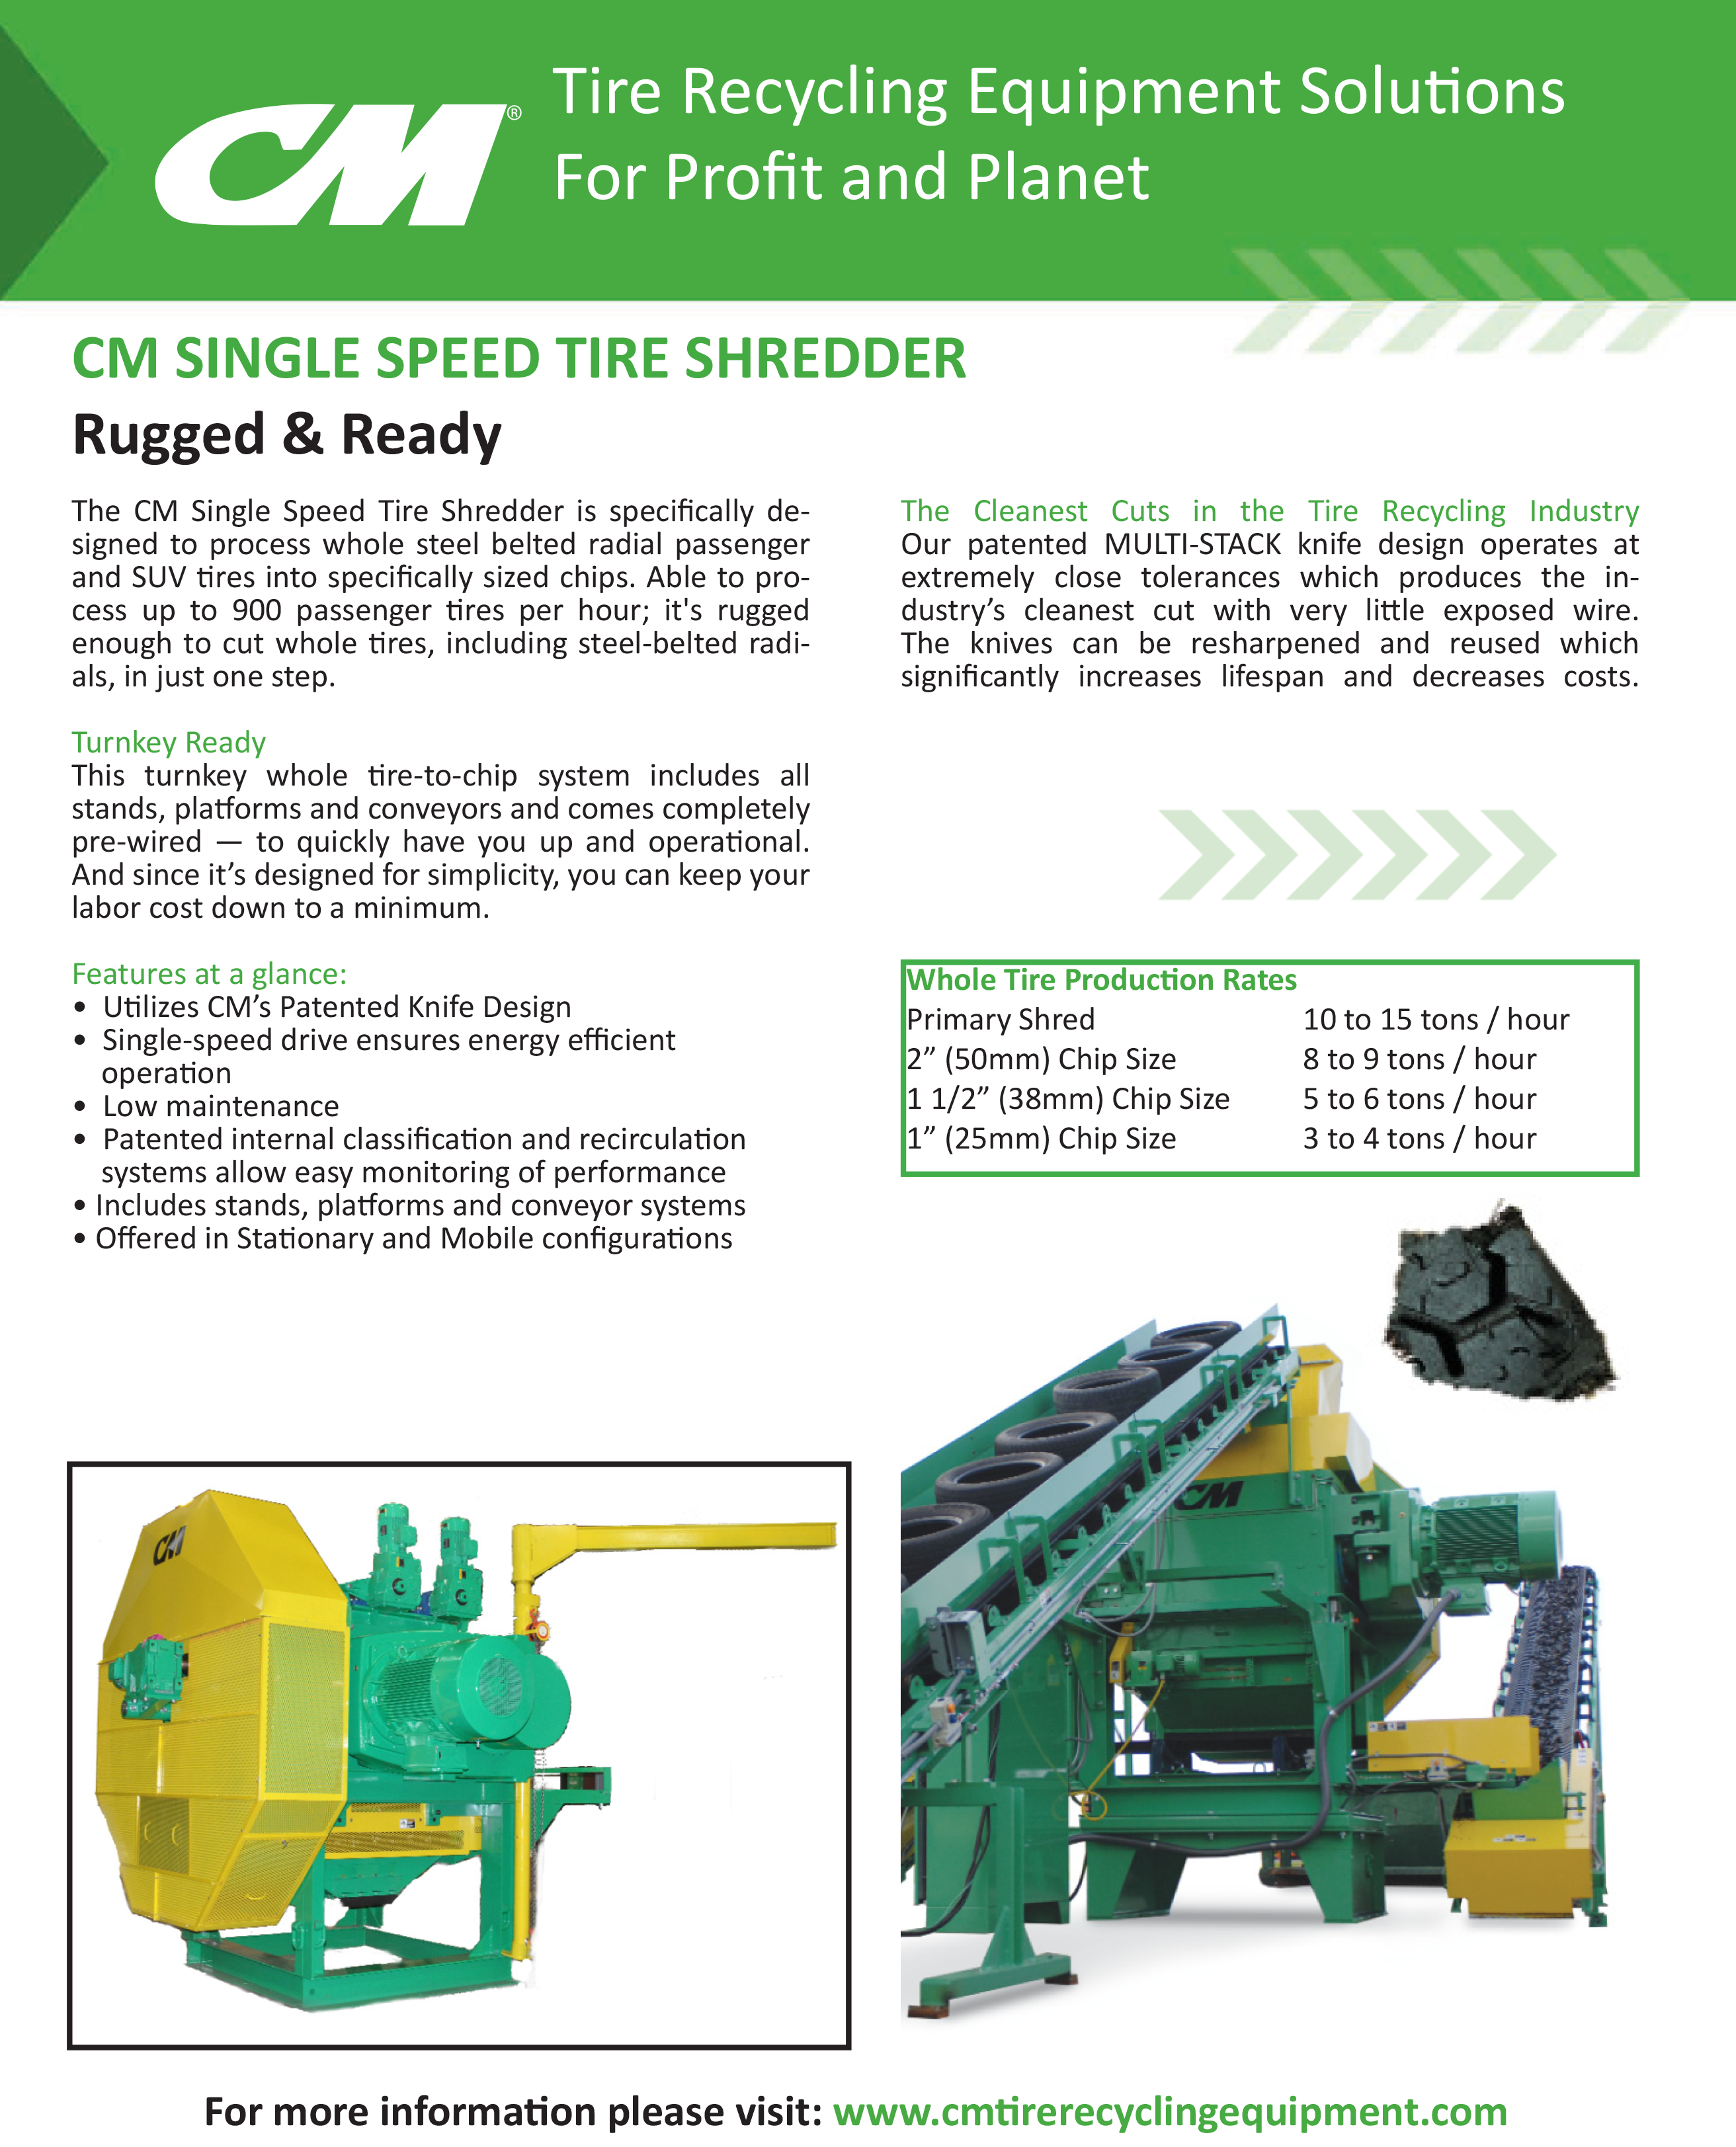 Learn more by viewing the CM Single Speed Tire Shredder Brochure